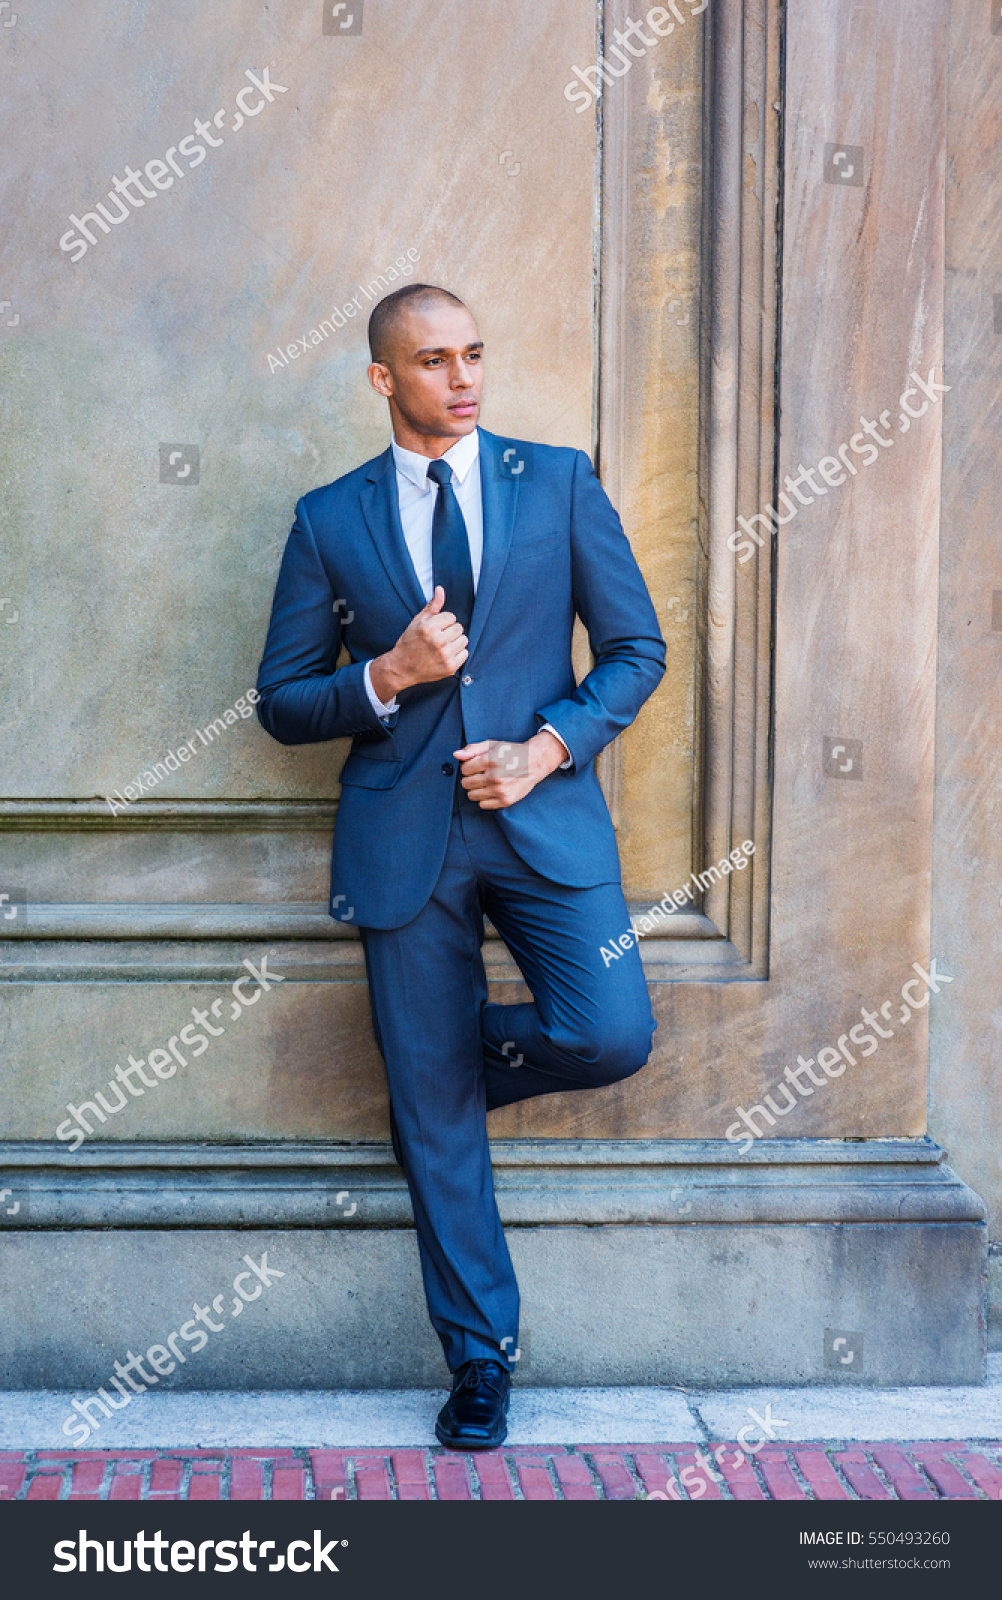 blue suit and white shoes